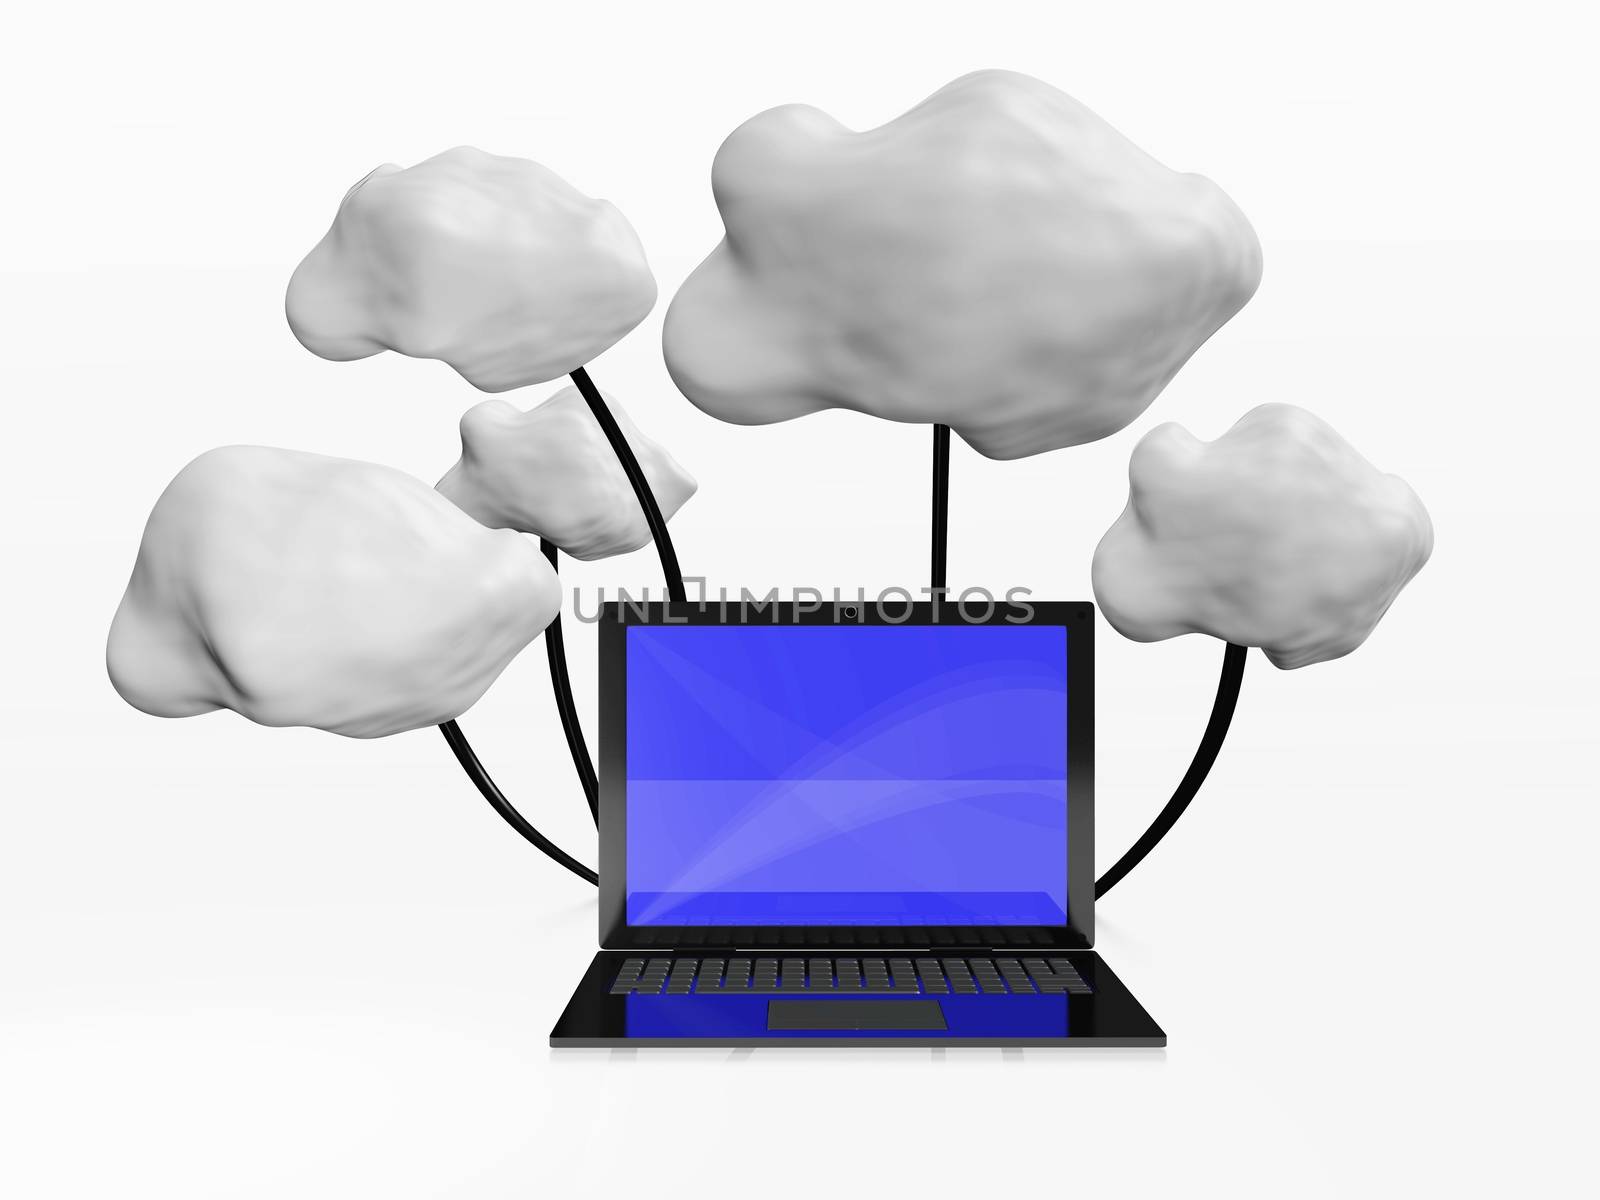 Cloud computing concept depicted with a 3D illustration of a laptop computer connected to clouds. This is suitable for cloud computing and remote database servers concepts.
